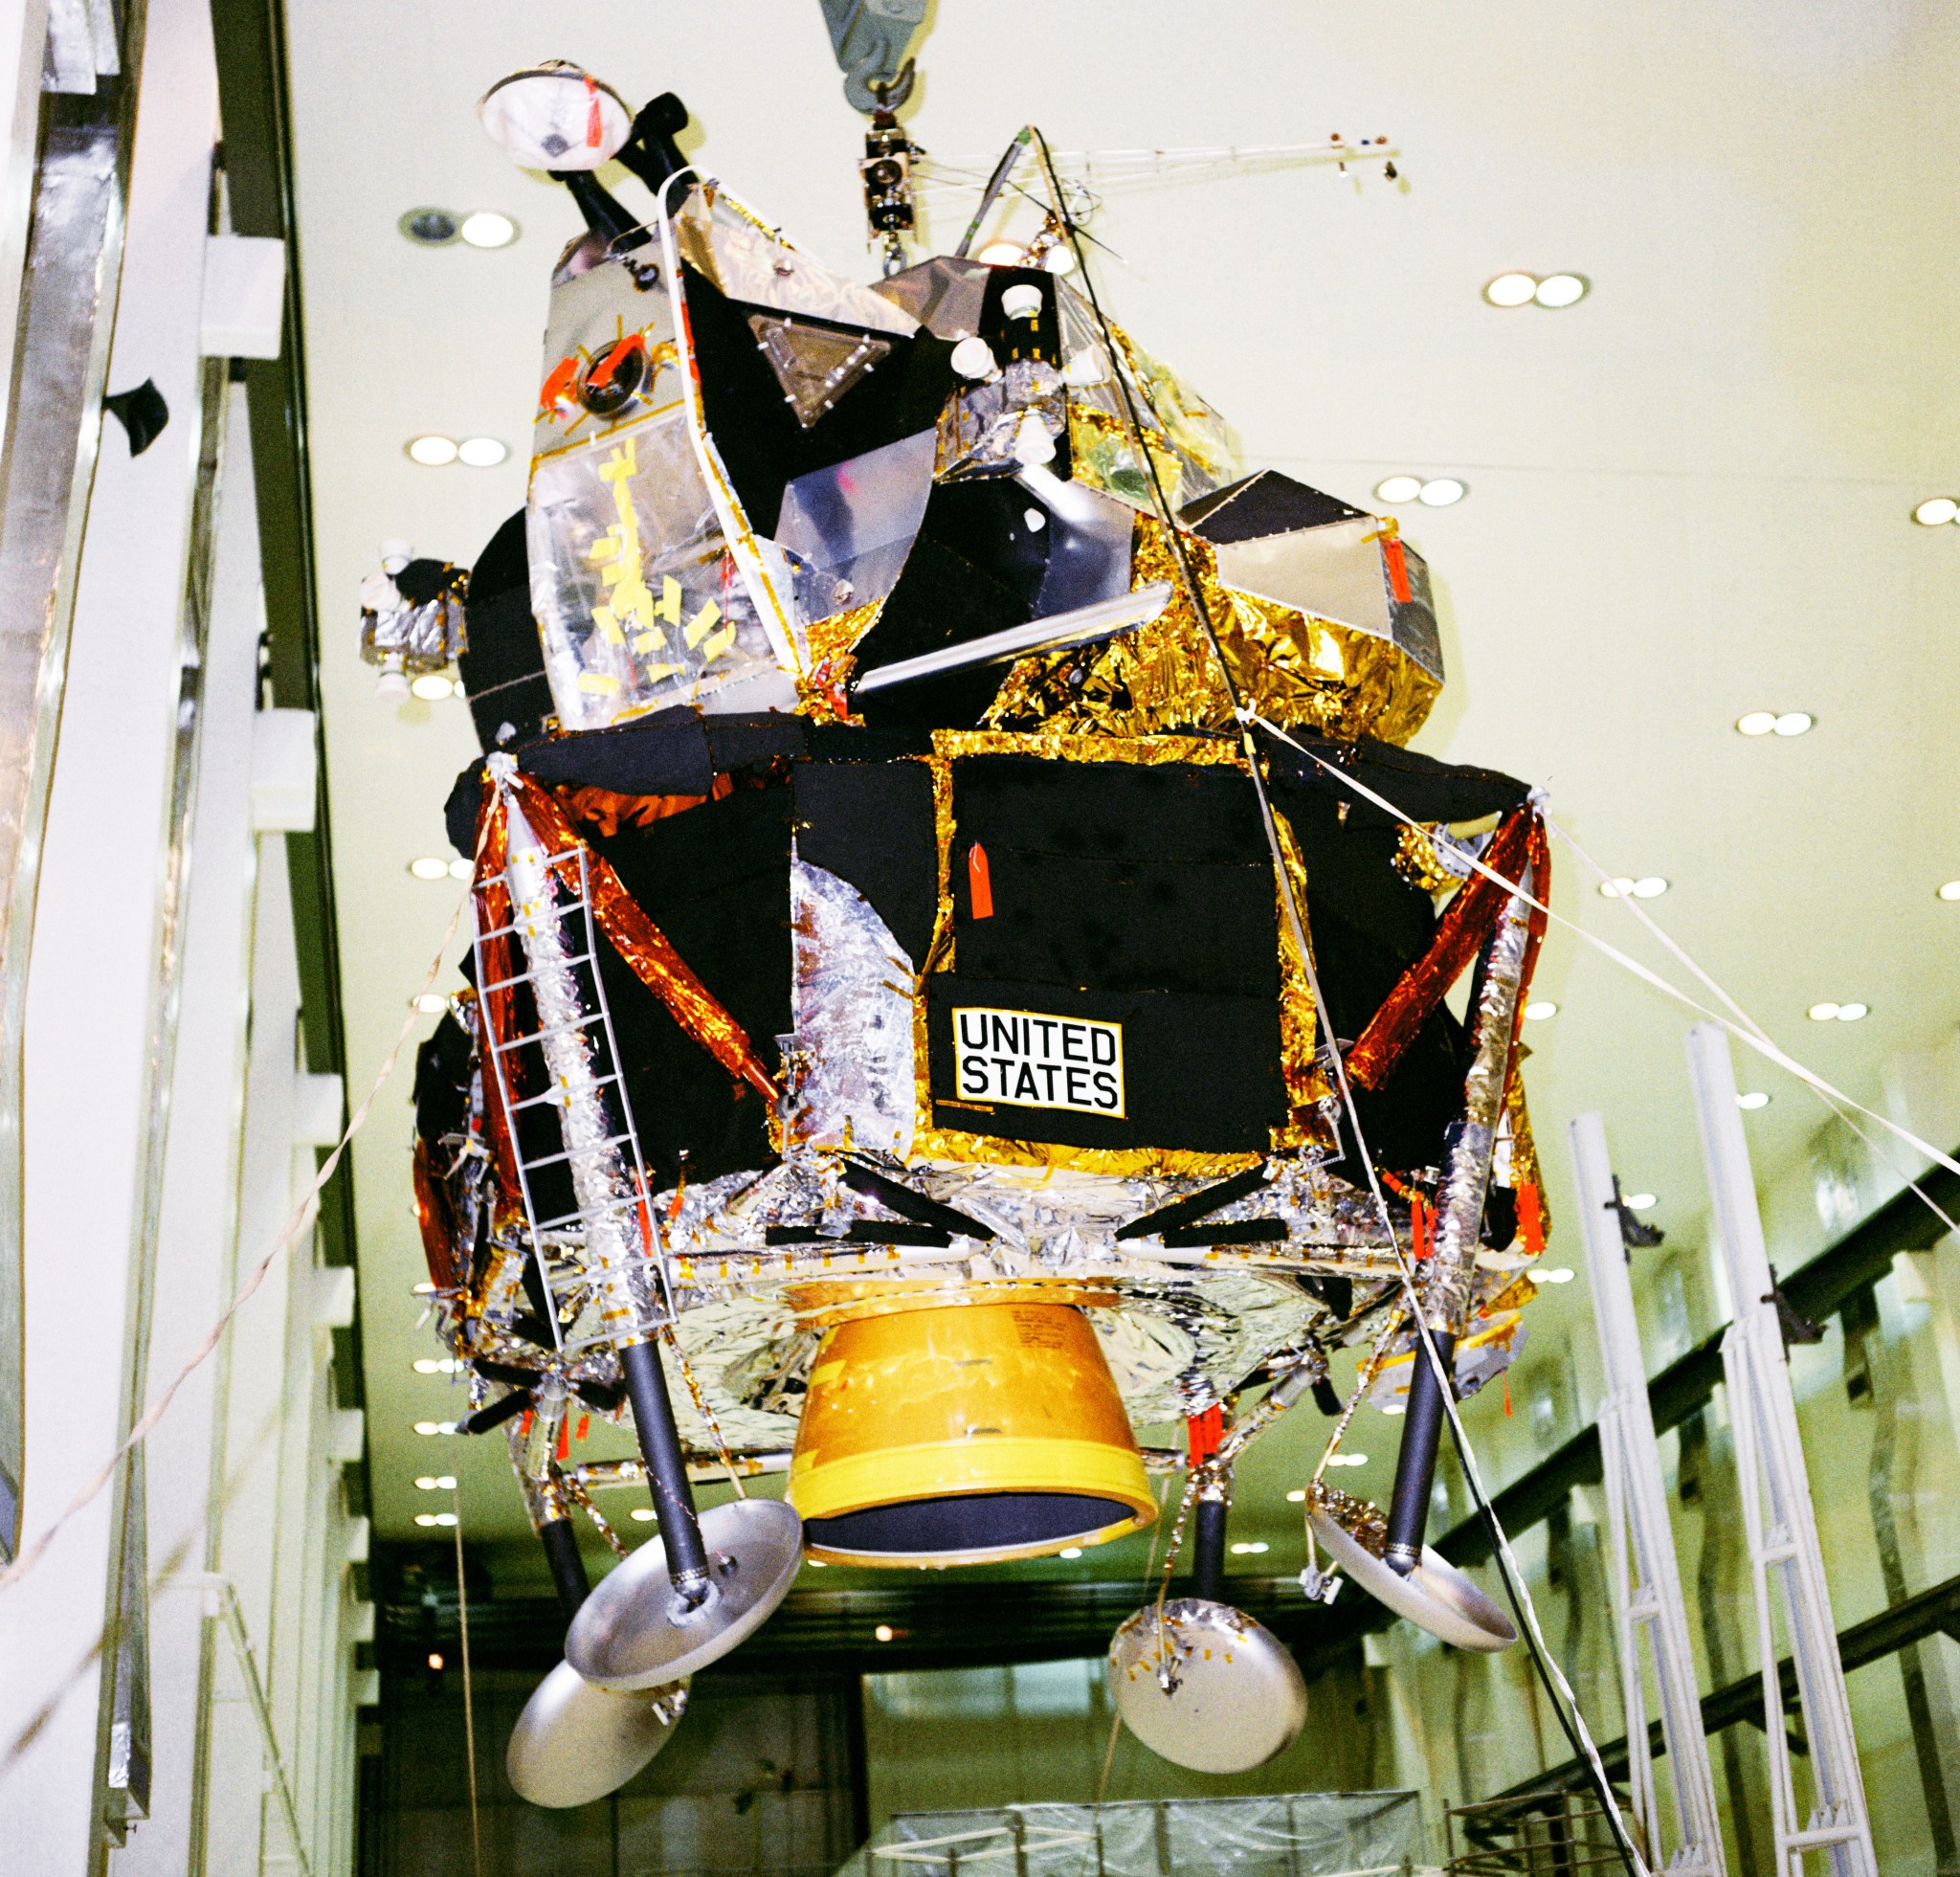 Lunar Module Processed at Kennedy Space Center